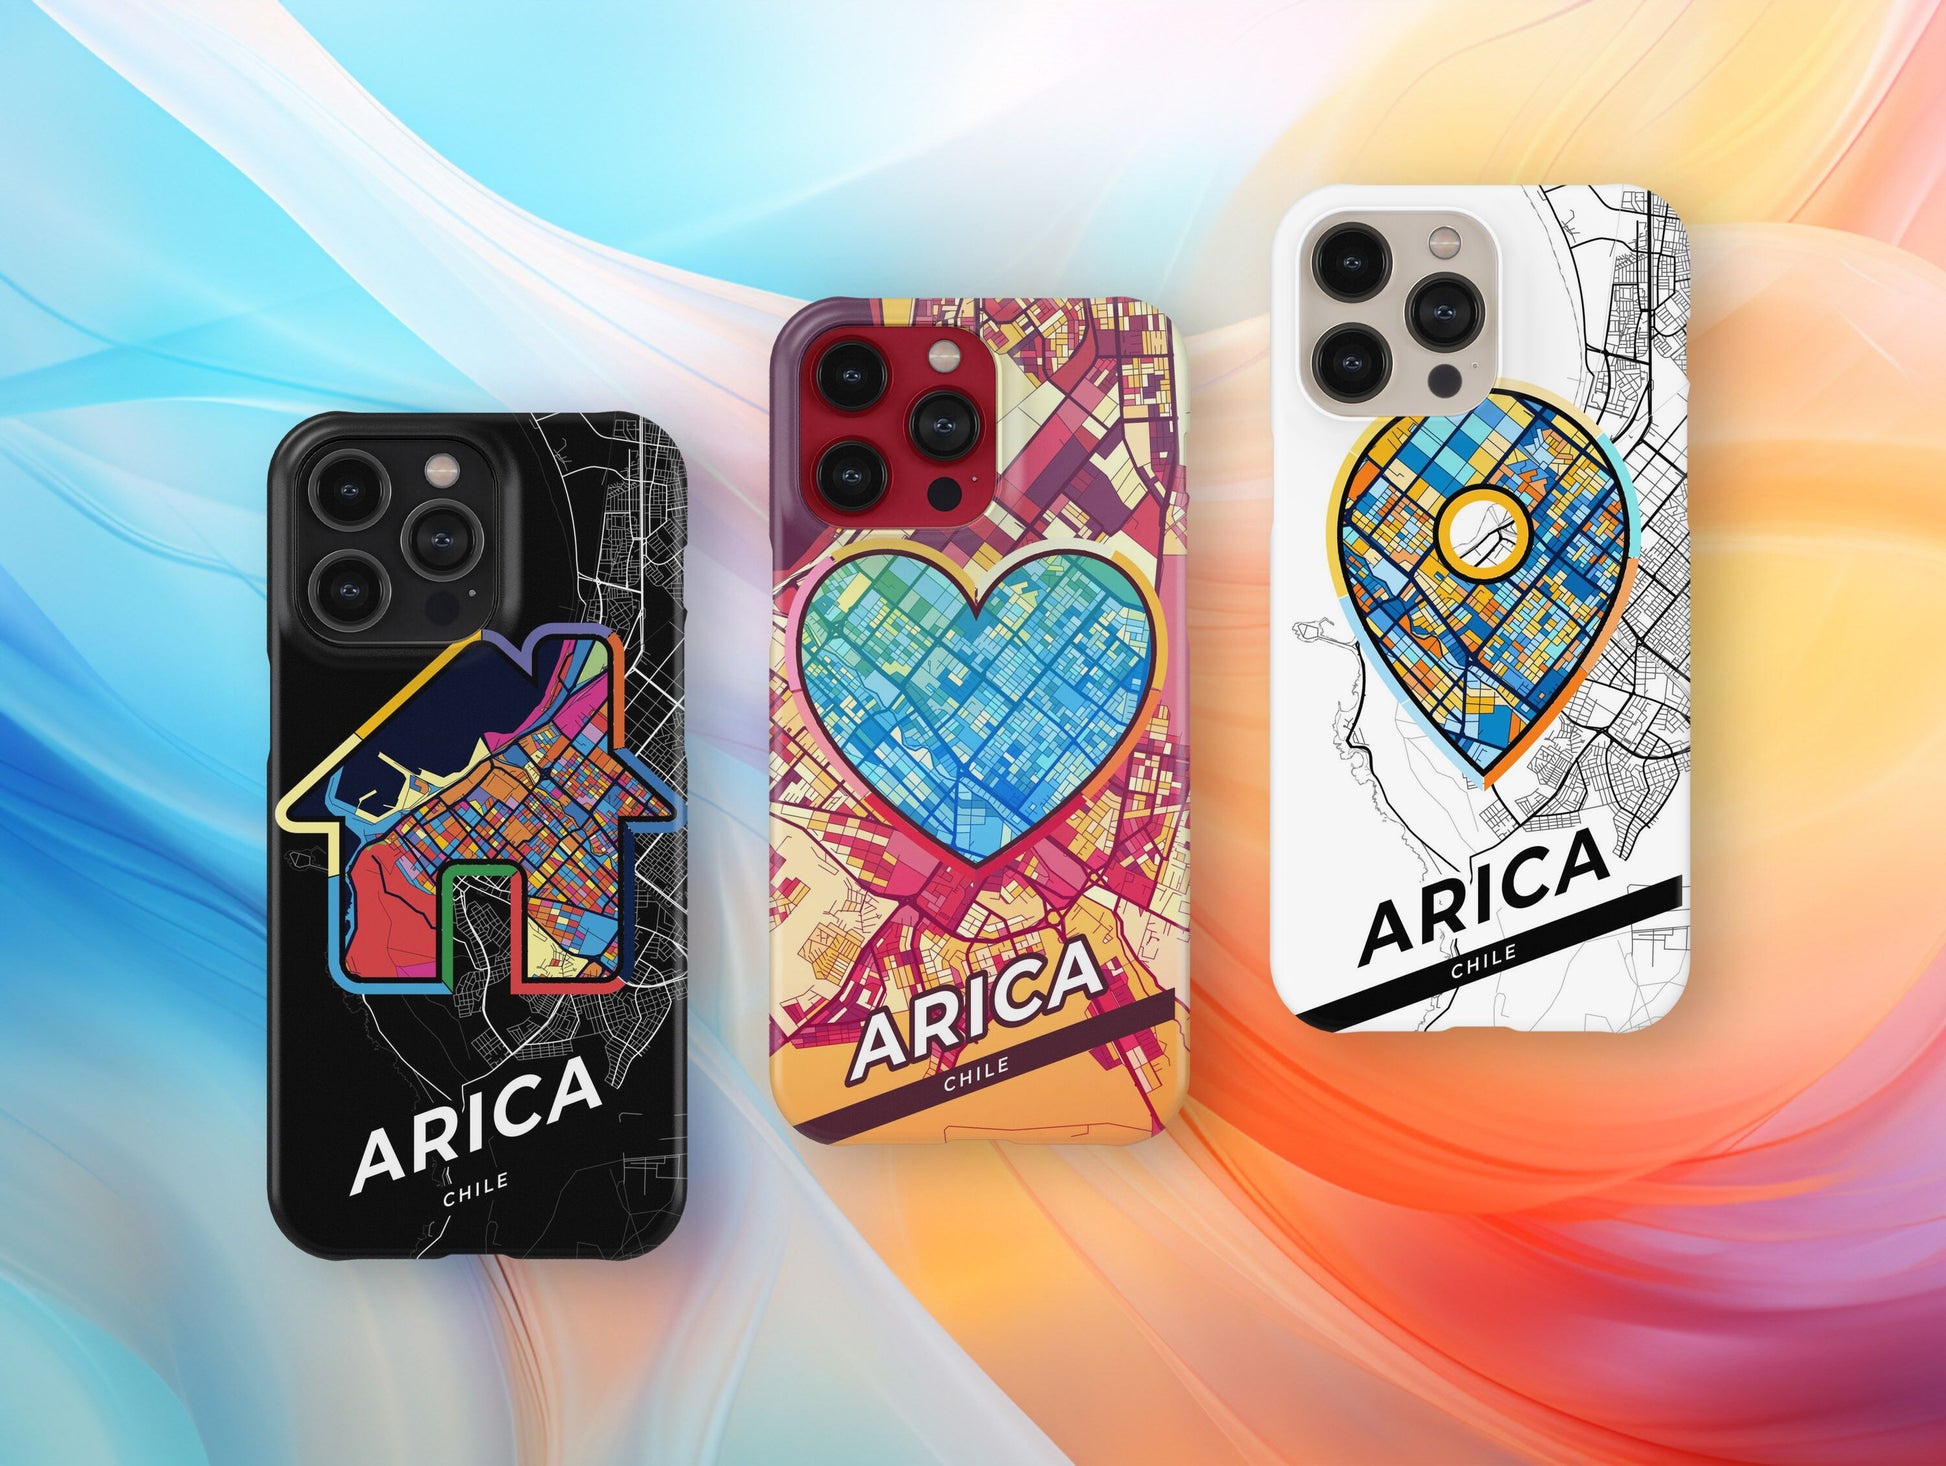 Arica Chile slim phone case with colorful icon. Birthday, wedding or housewarming gift. Couple match cases.